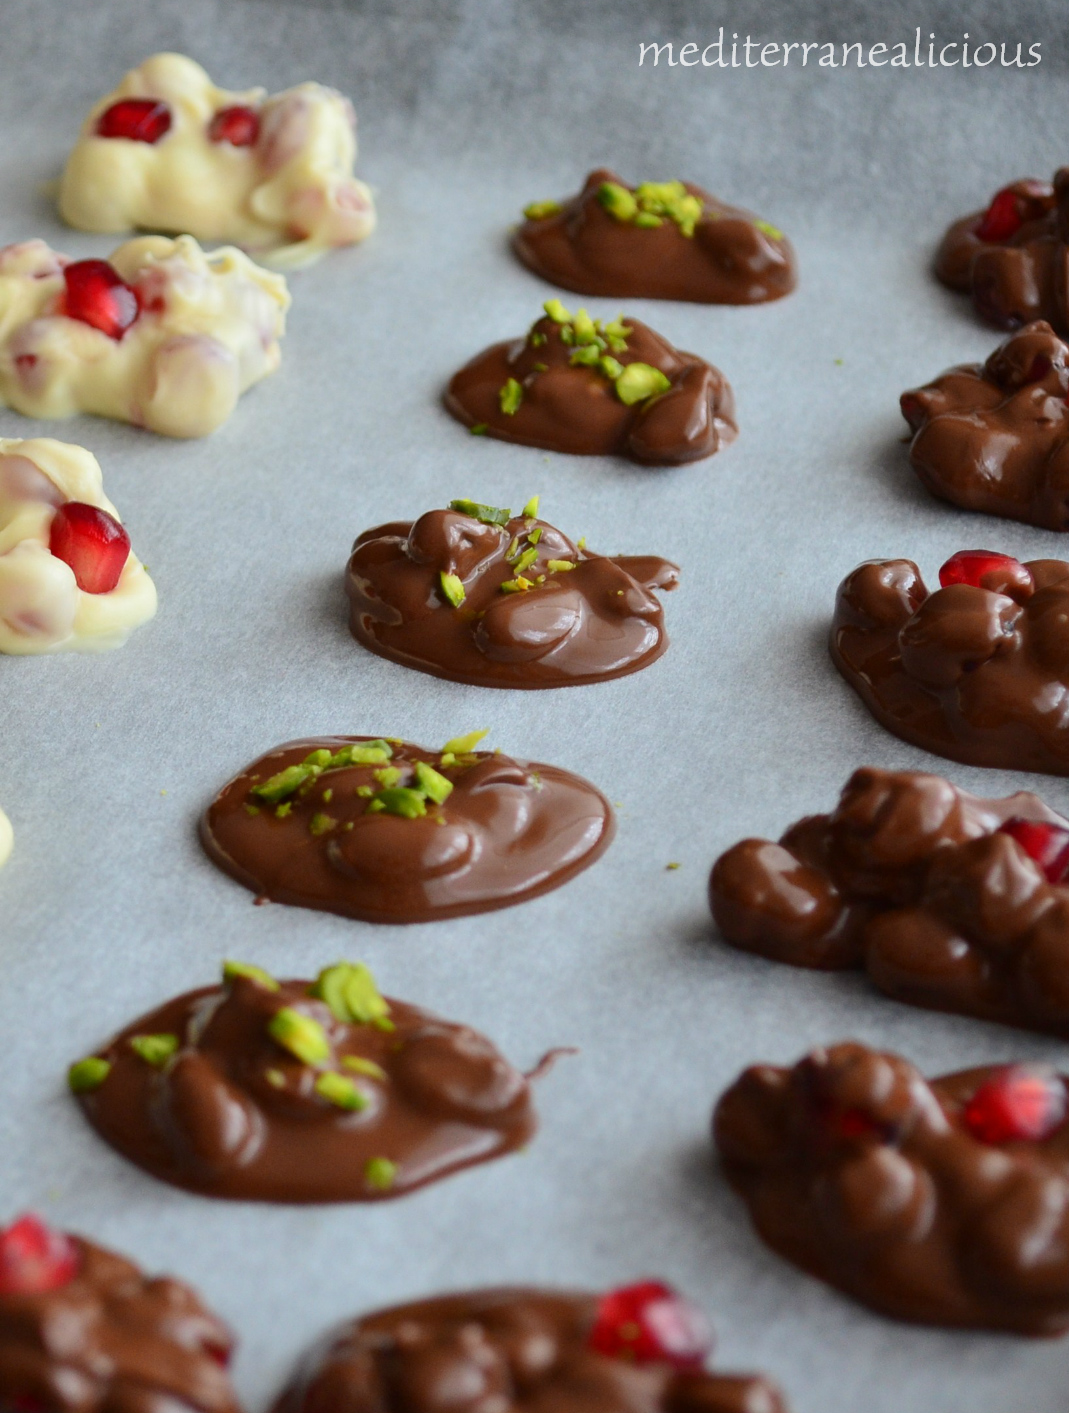 Chocolate Bites with Pomegranate Seeds and Fresh Pistachios